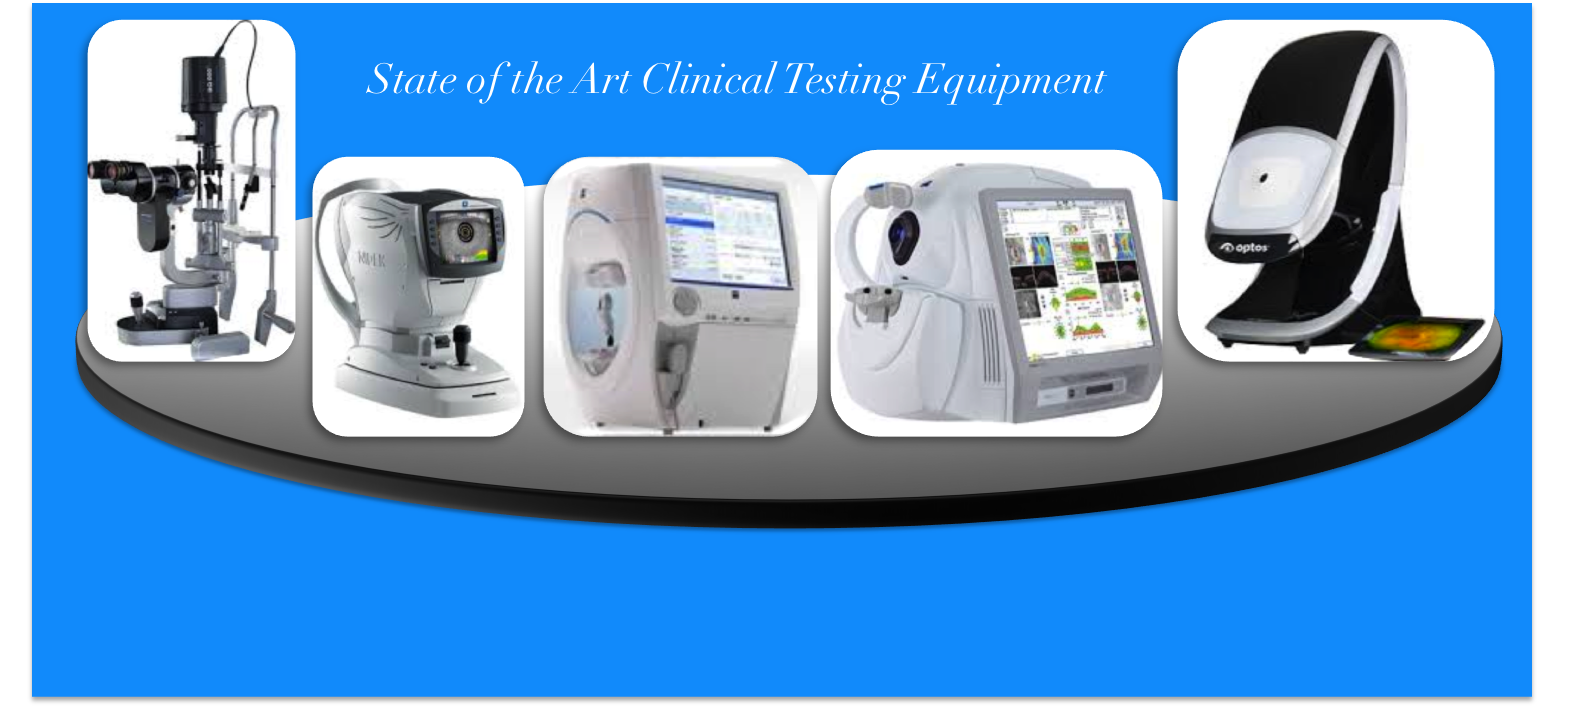 State of the Art Clinical Testing Equipment